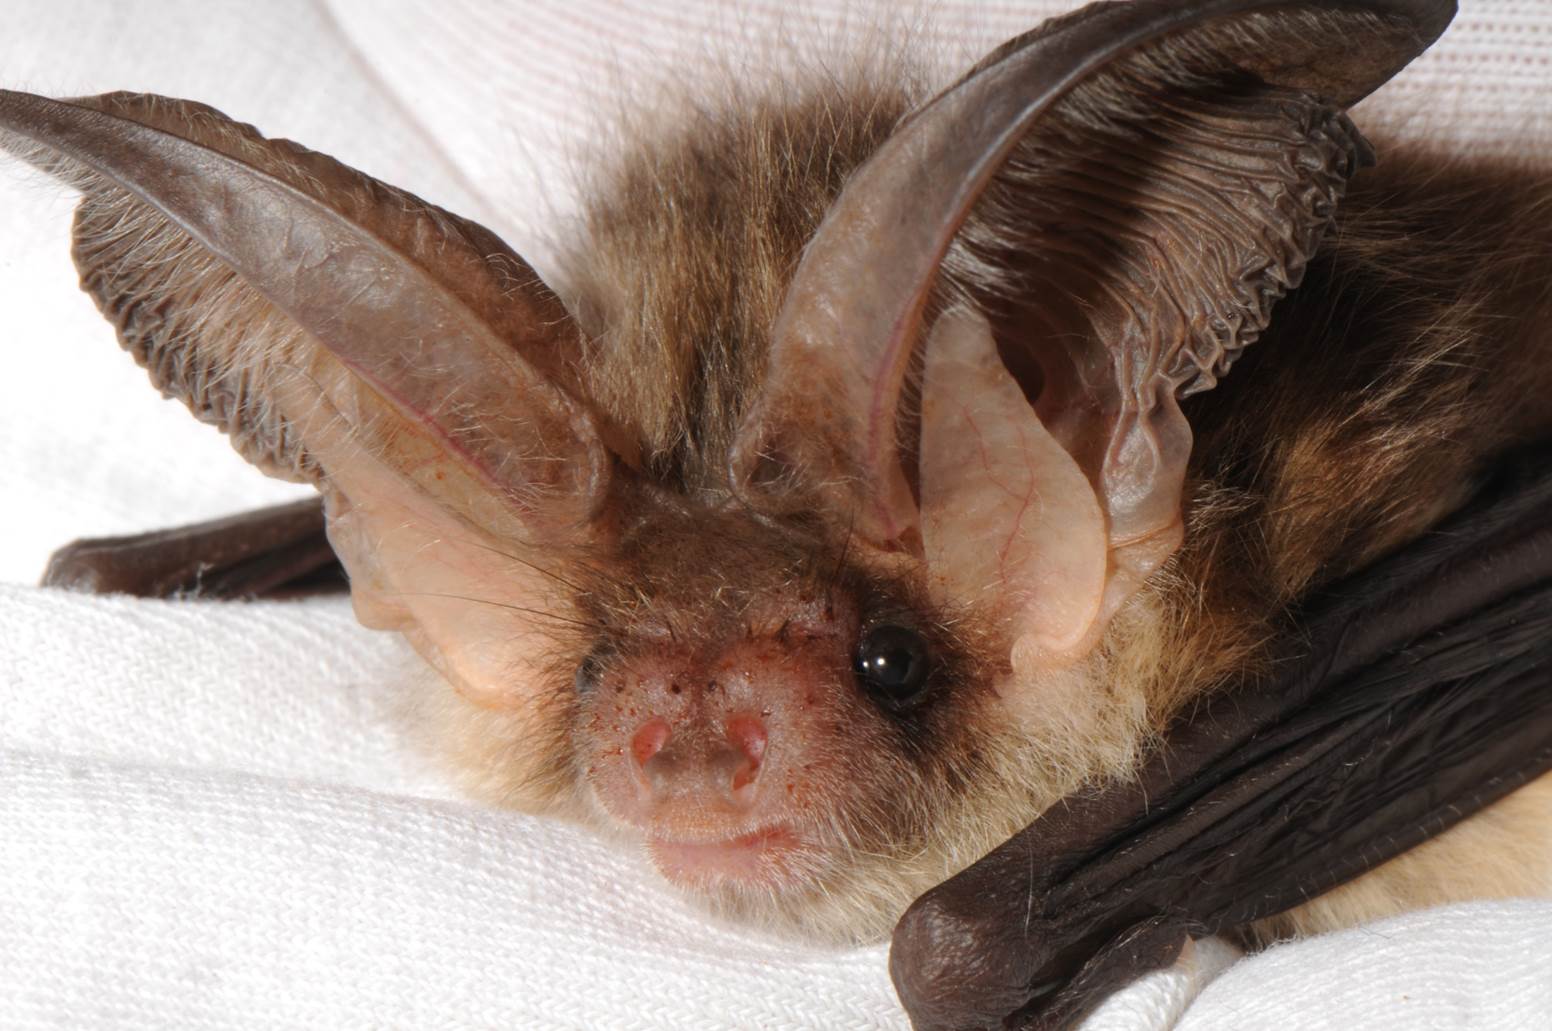 A bat with large ears

Description automatically generated